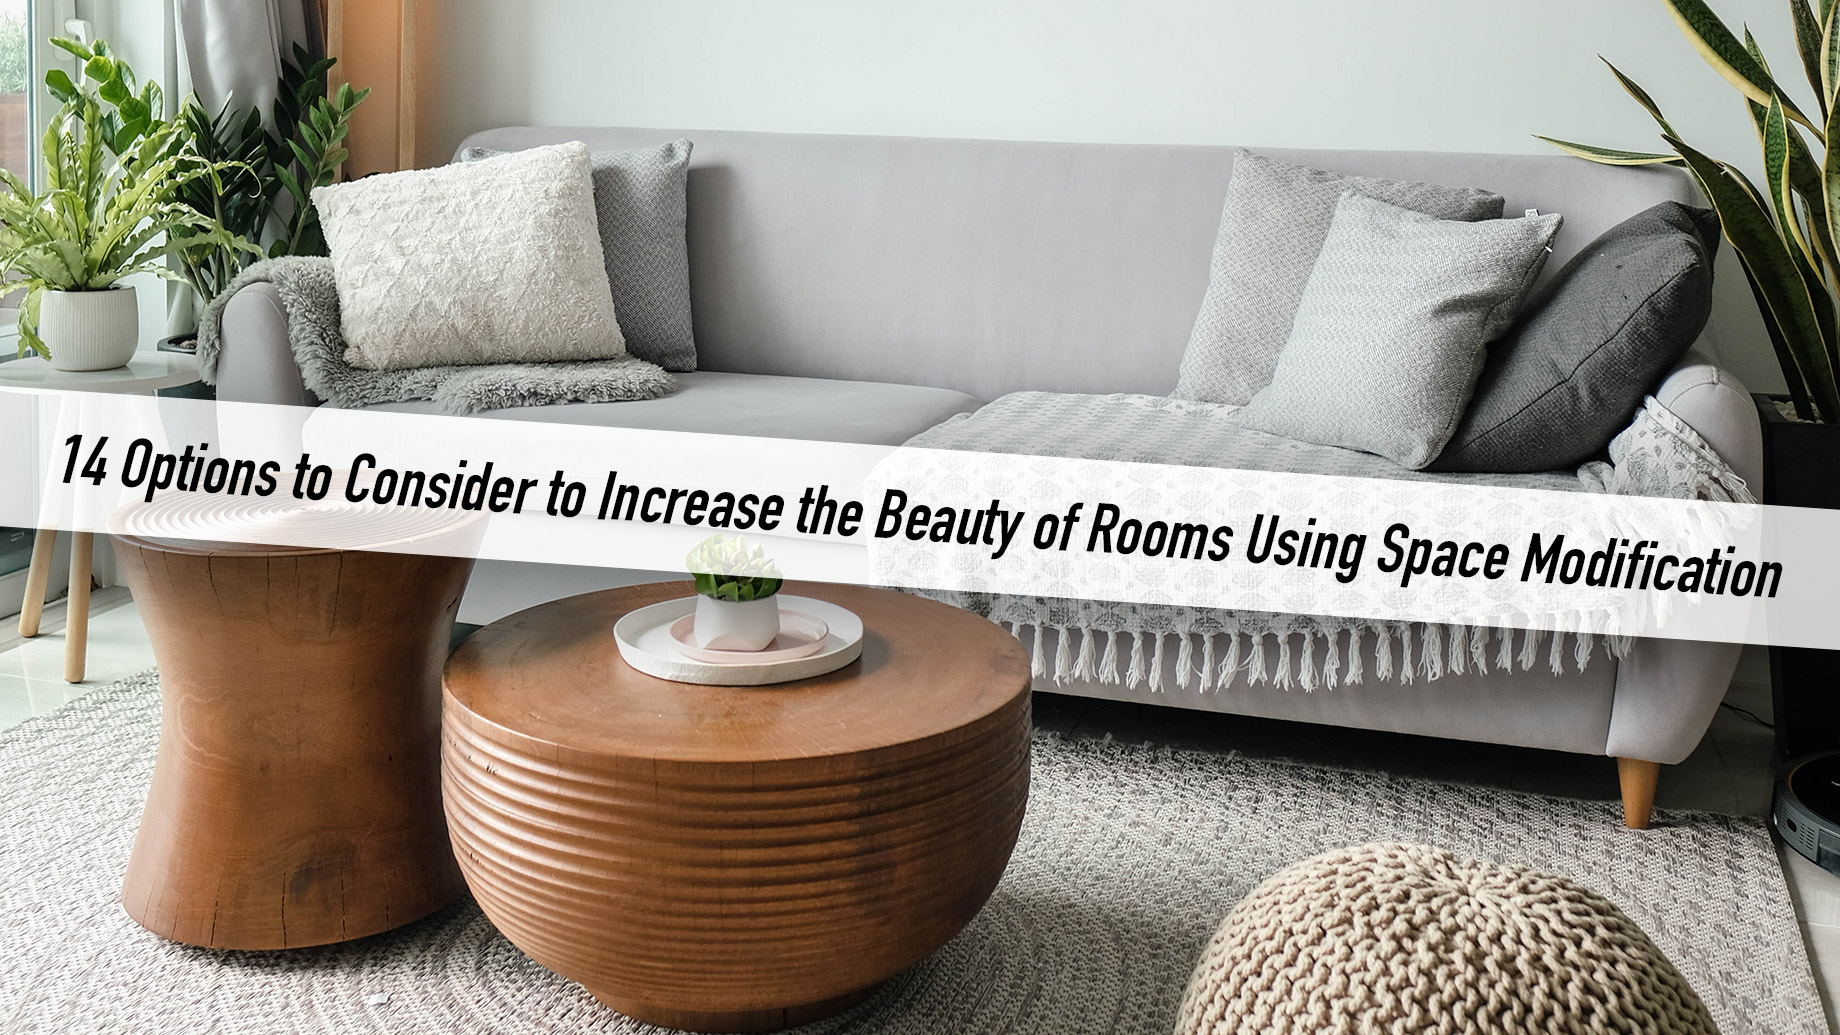 14 Options to Consider to Increase the Beauty of Rooms Using Space Modification